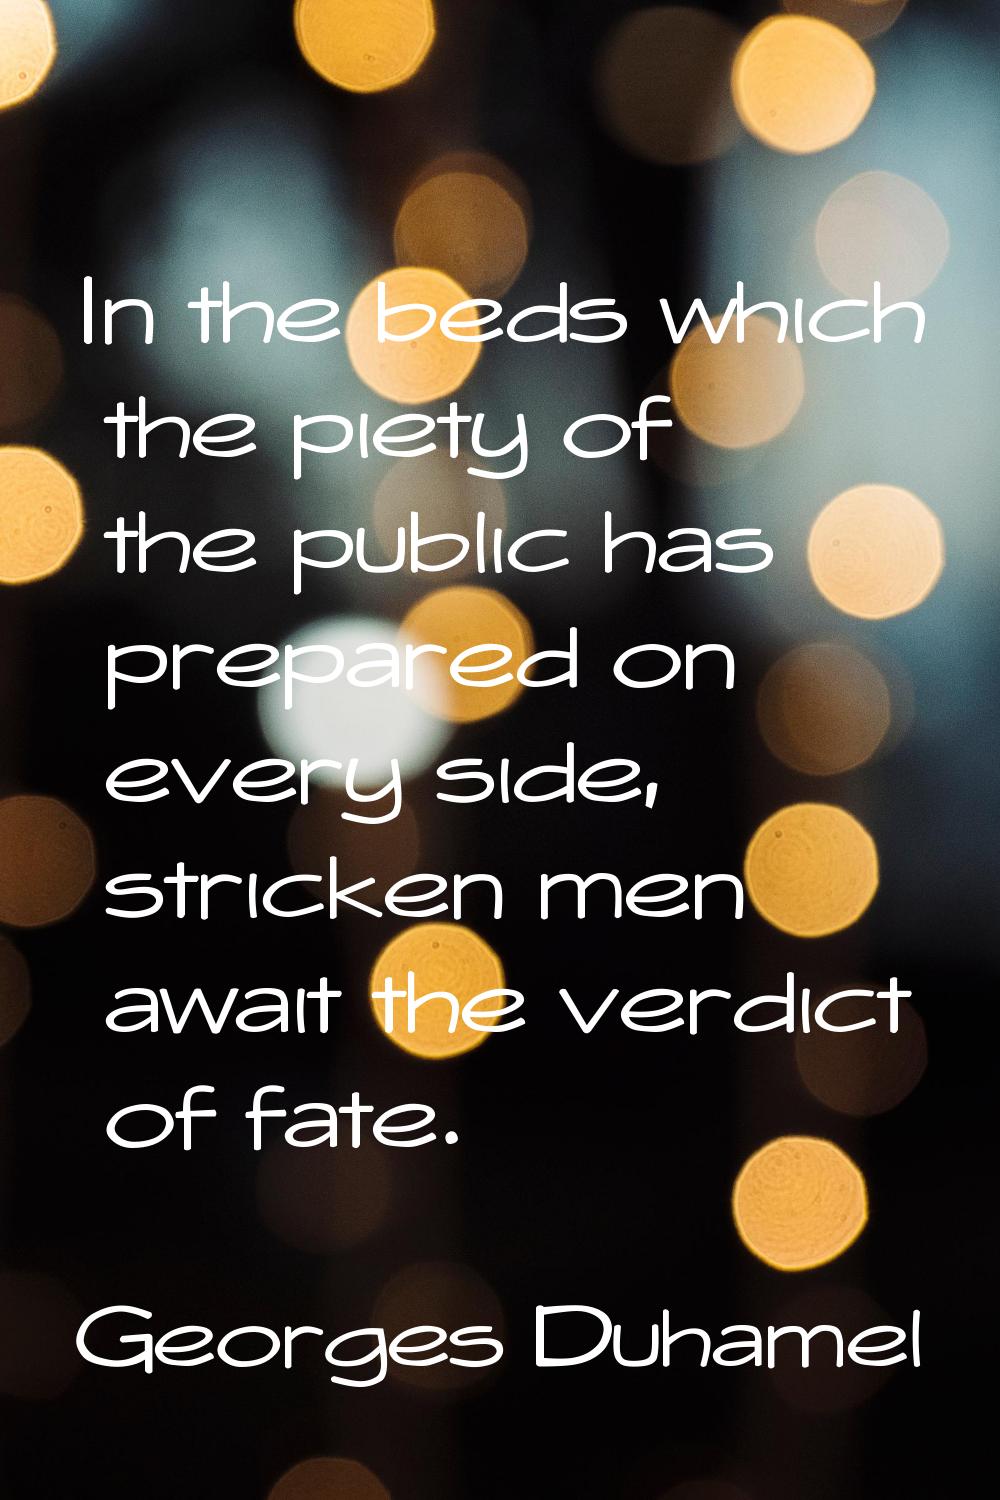 In the beds which the piety of the public has prepared on every side, stricken men await the verdic